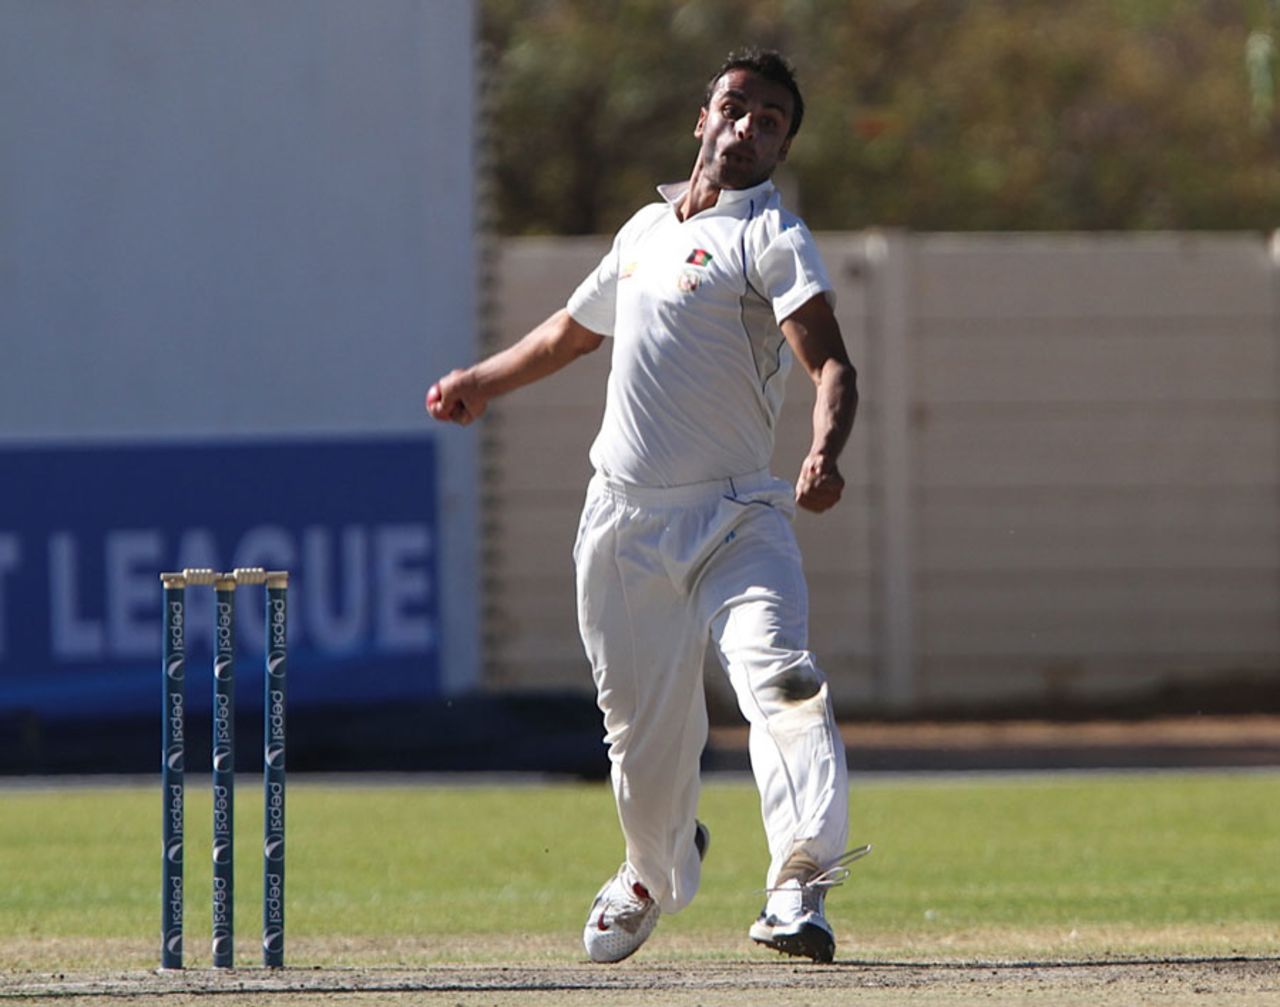 Izatullah Dawlatzai picked up five wickets, including a hat-trick, Namibia v Afghanistan, ICC Intercontinental Cup, 3rd day, Windhoek, August 6, 2013